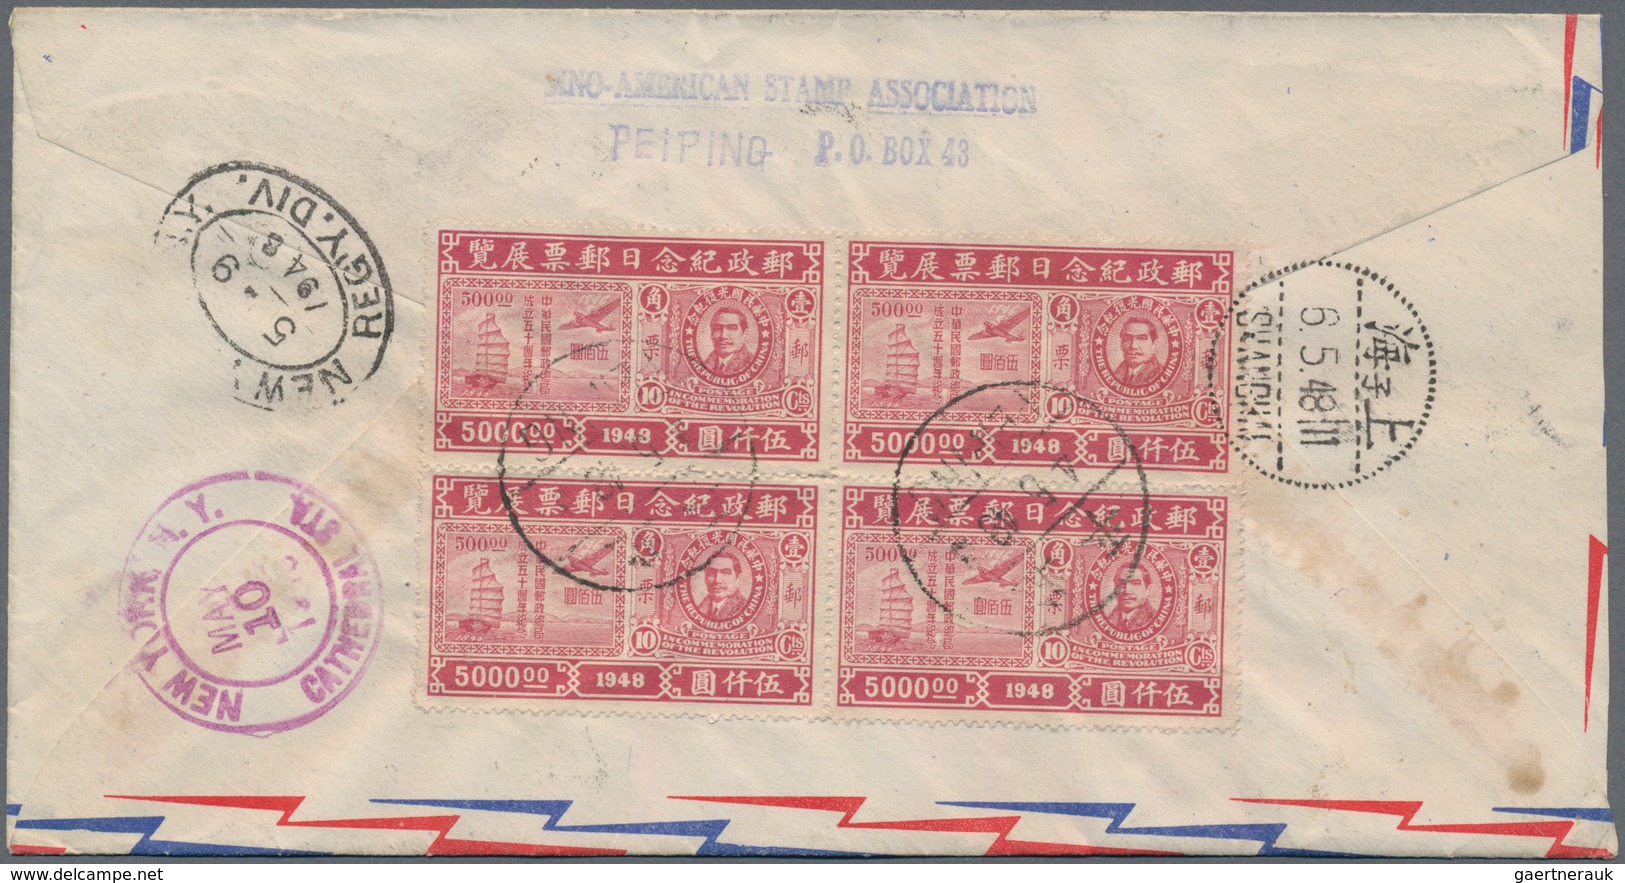 China: 1948/49, four covers with mostly gold yuan surcharges to Germany (2) or USA (2), inc. registr